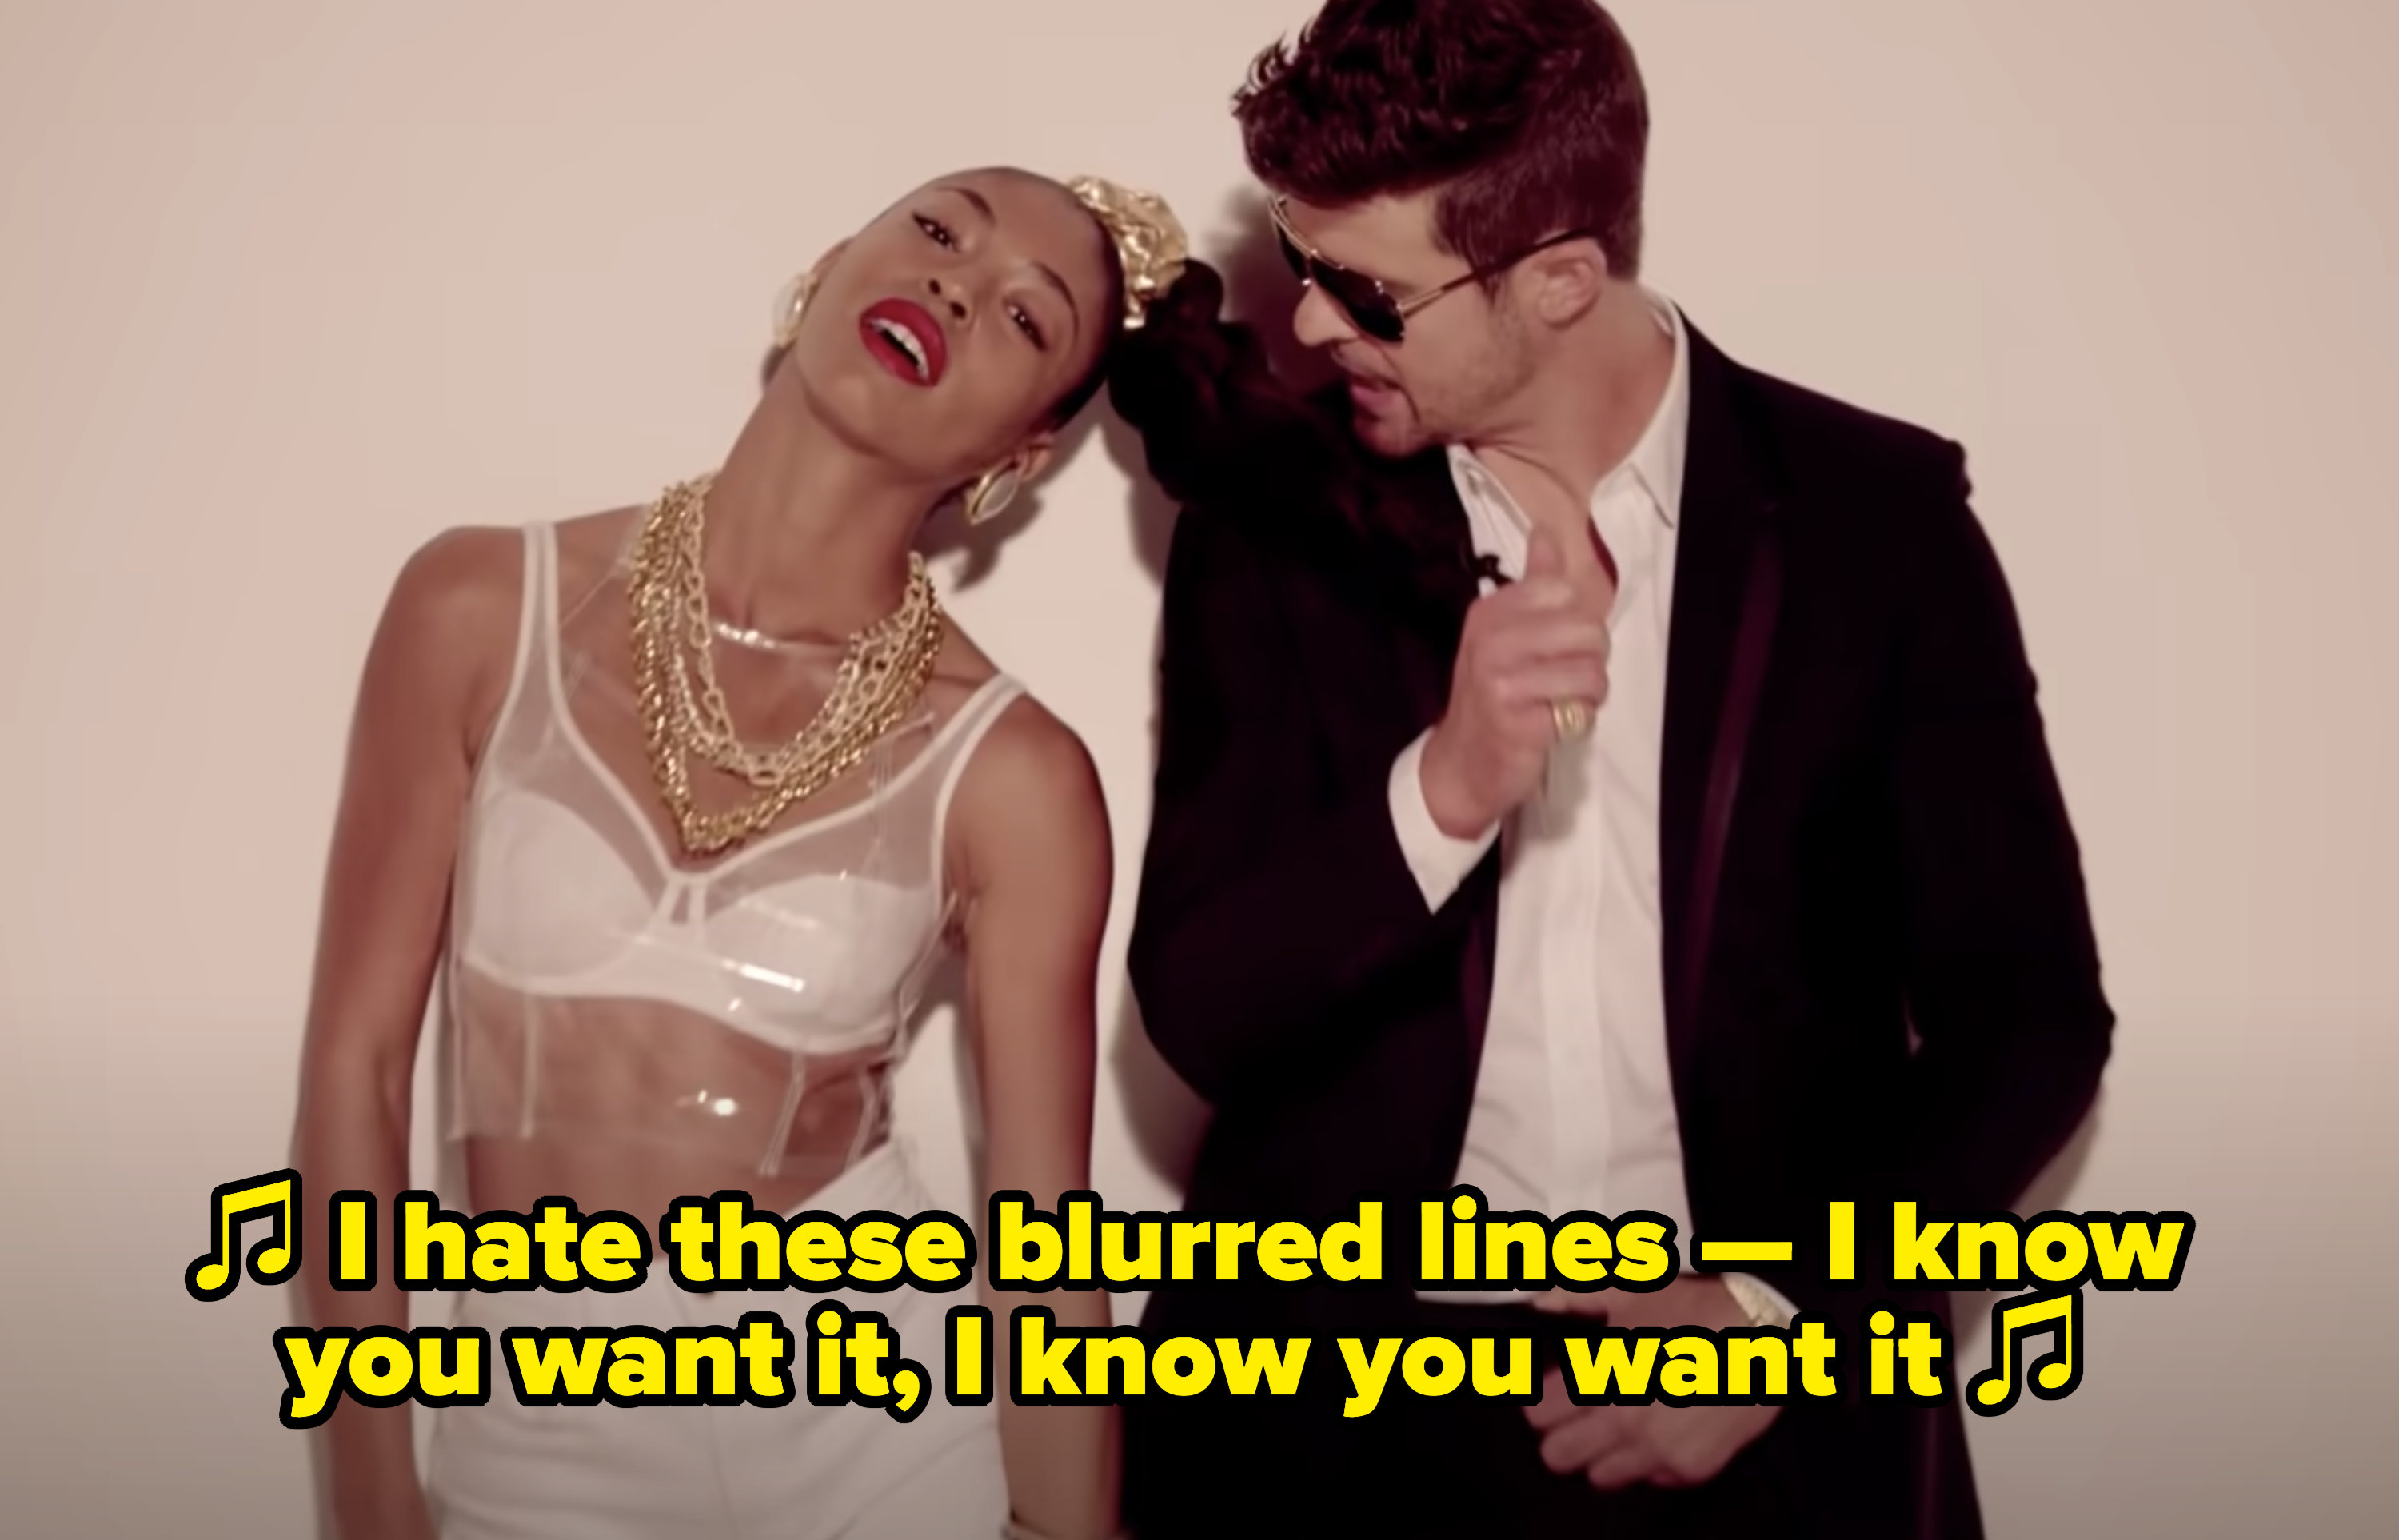 Robin Thicke singing: &quot;I hate these blurred lines — I know you want it, I know you want it&quot;